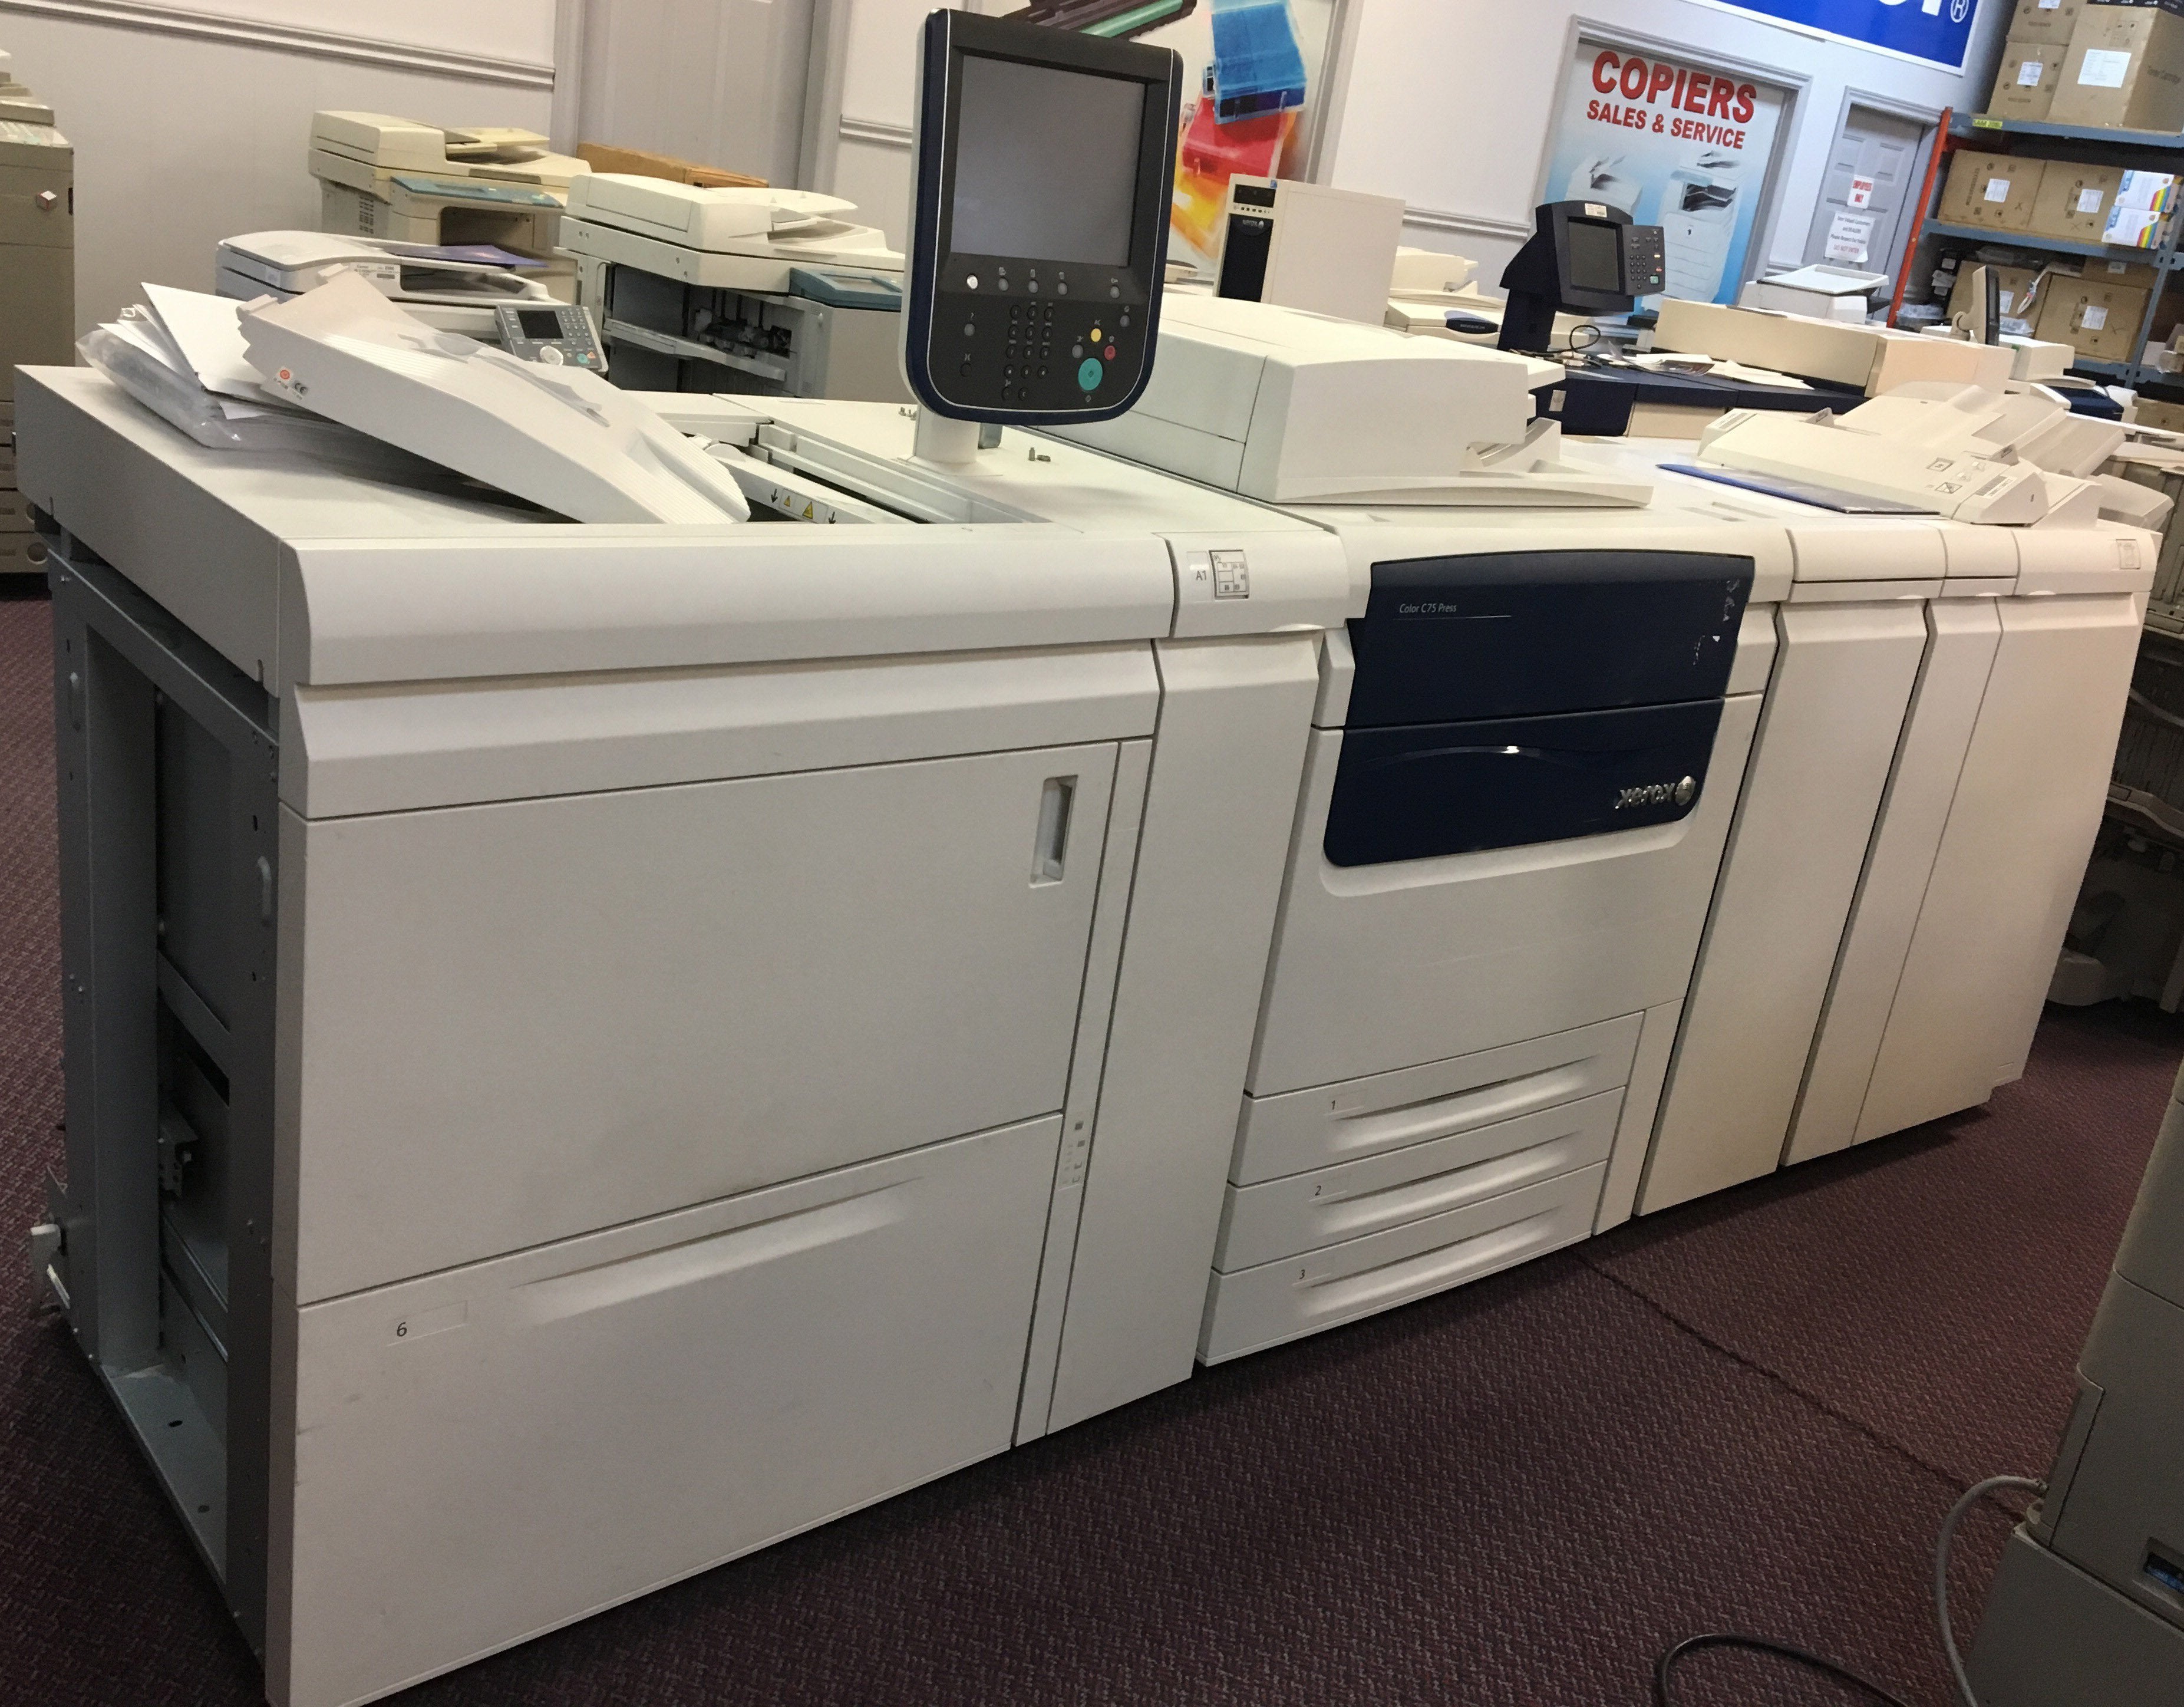 Only $199/month - Xerox Color C75 Press Production Printer Business Copier Large Capacity Tray Booklet maker Finisher